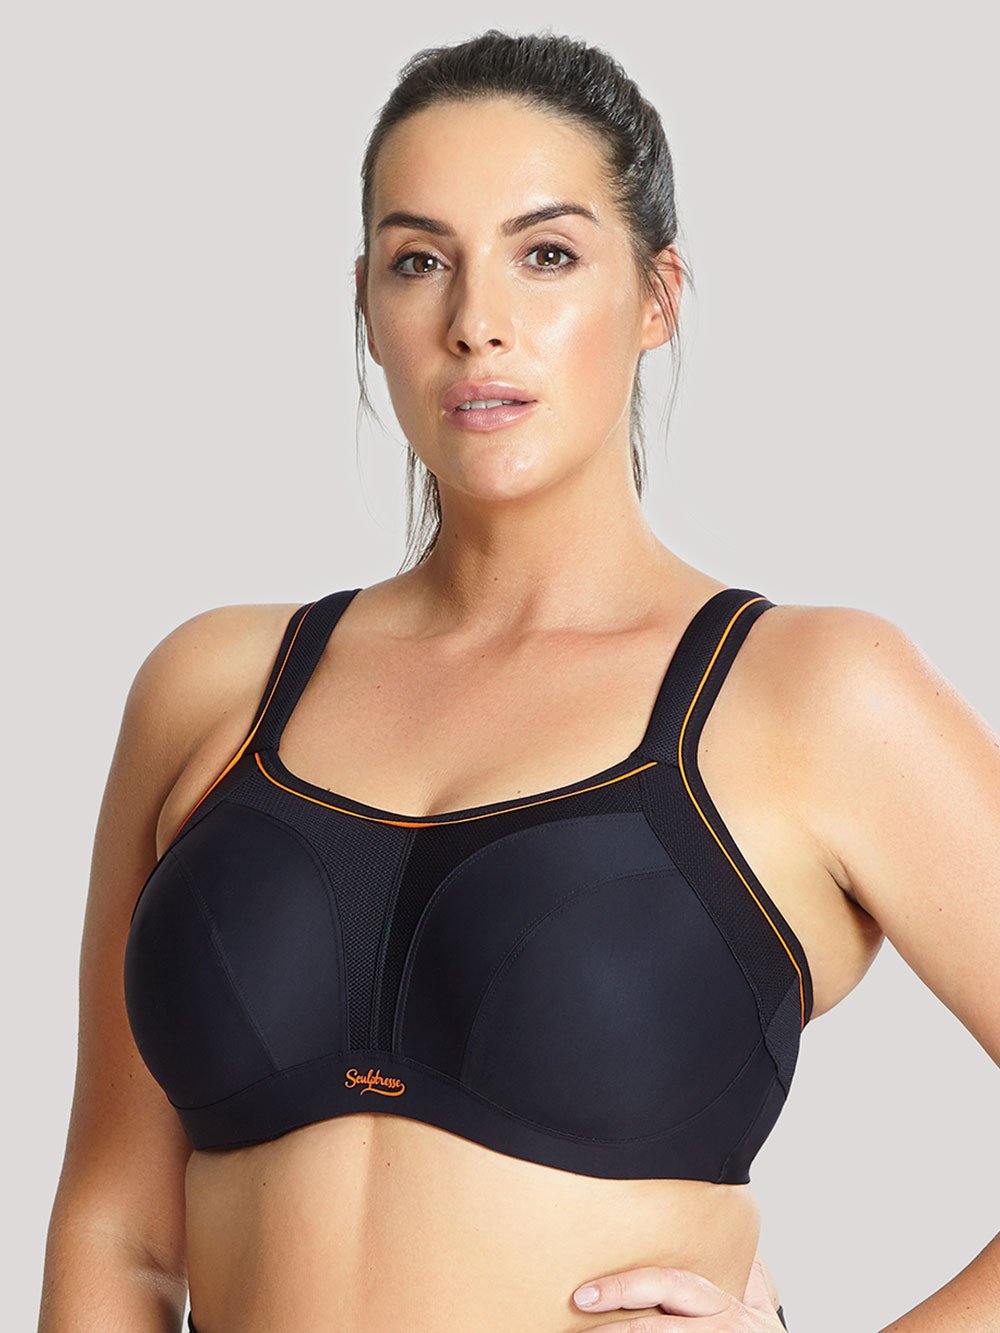 BEYOND SPORTS BRA - THE ULTIMATE MAXIMUM SUPPORT + MAX COVERAGE